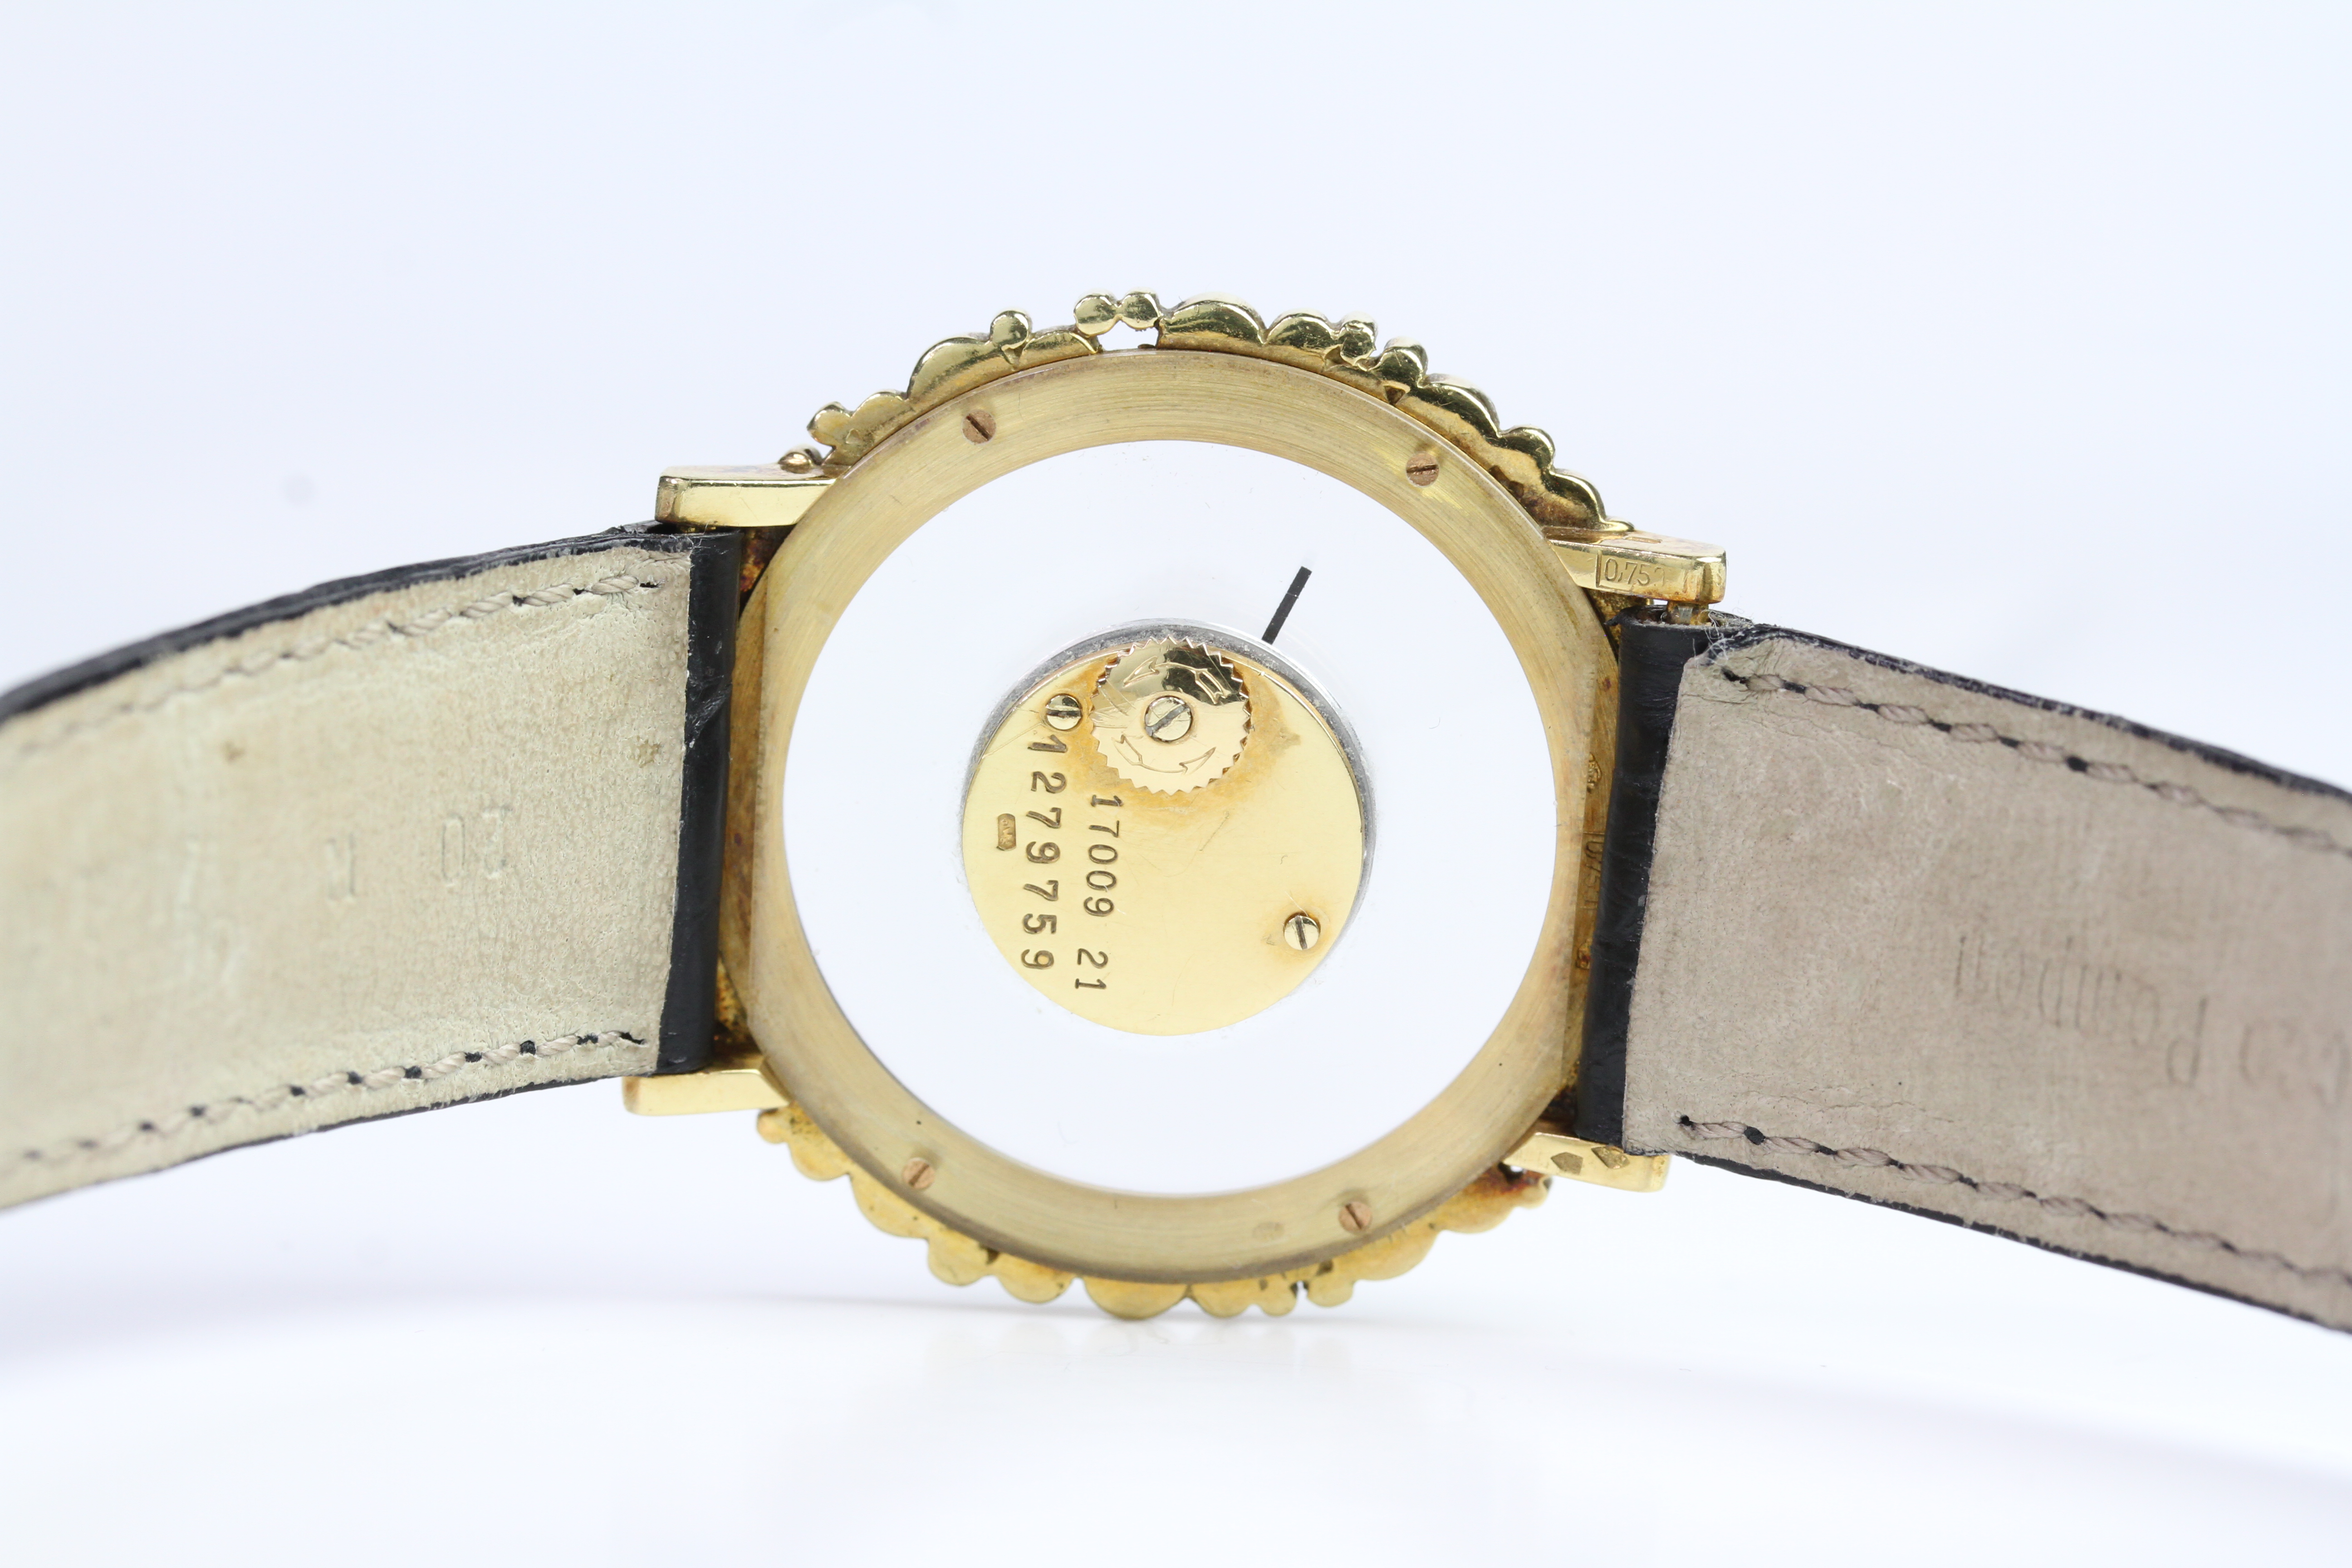 RARE AND UNUSUAL VINTAGE JAEGER-LECOULTRE MYSTERY WATCH REFERENCE 17009 -21 CIRCA 1960s, an amstrack - Image 2 of 2